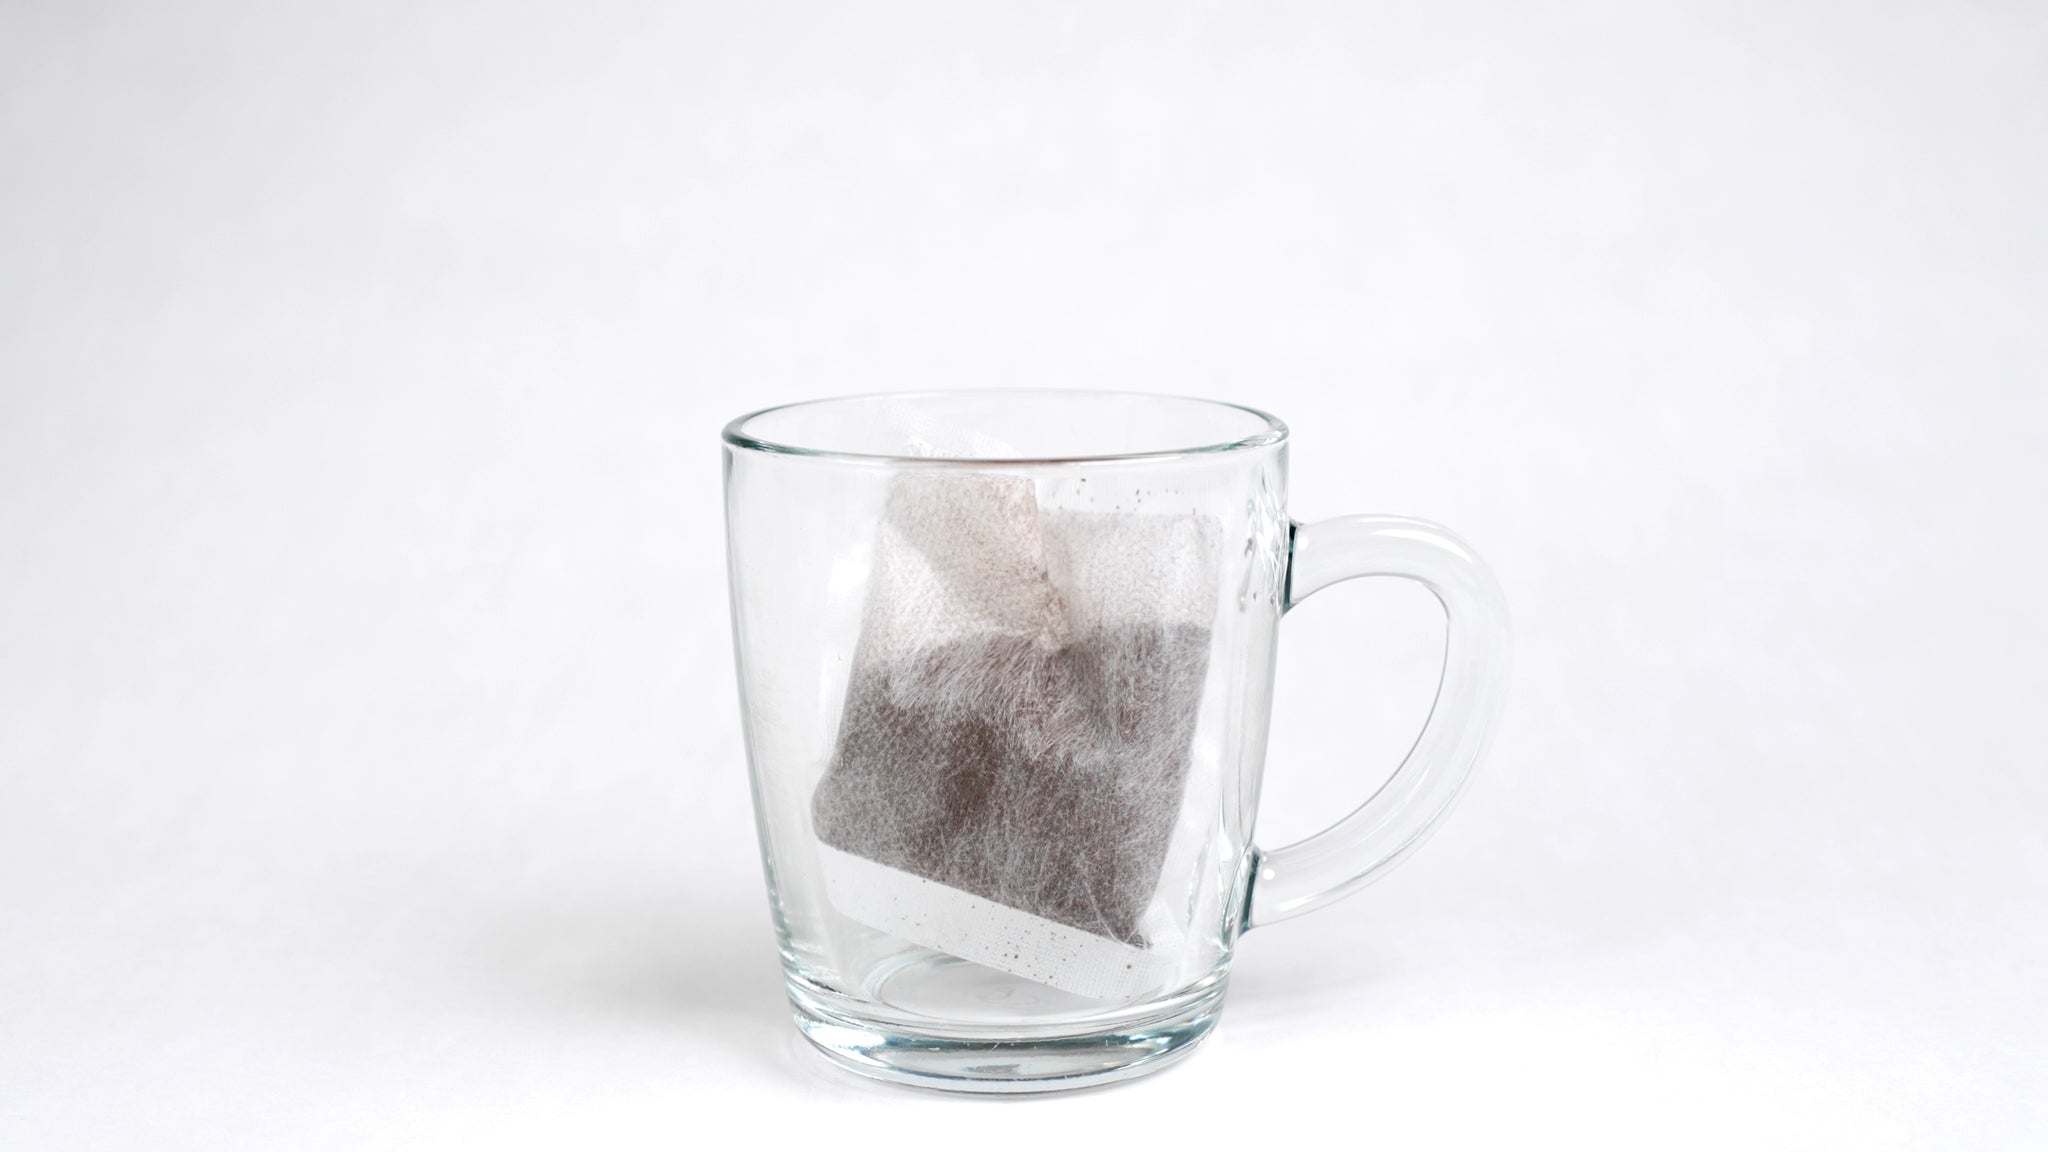 Coffee Bag in Cup